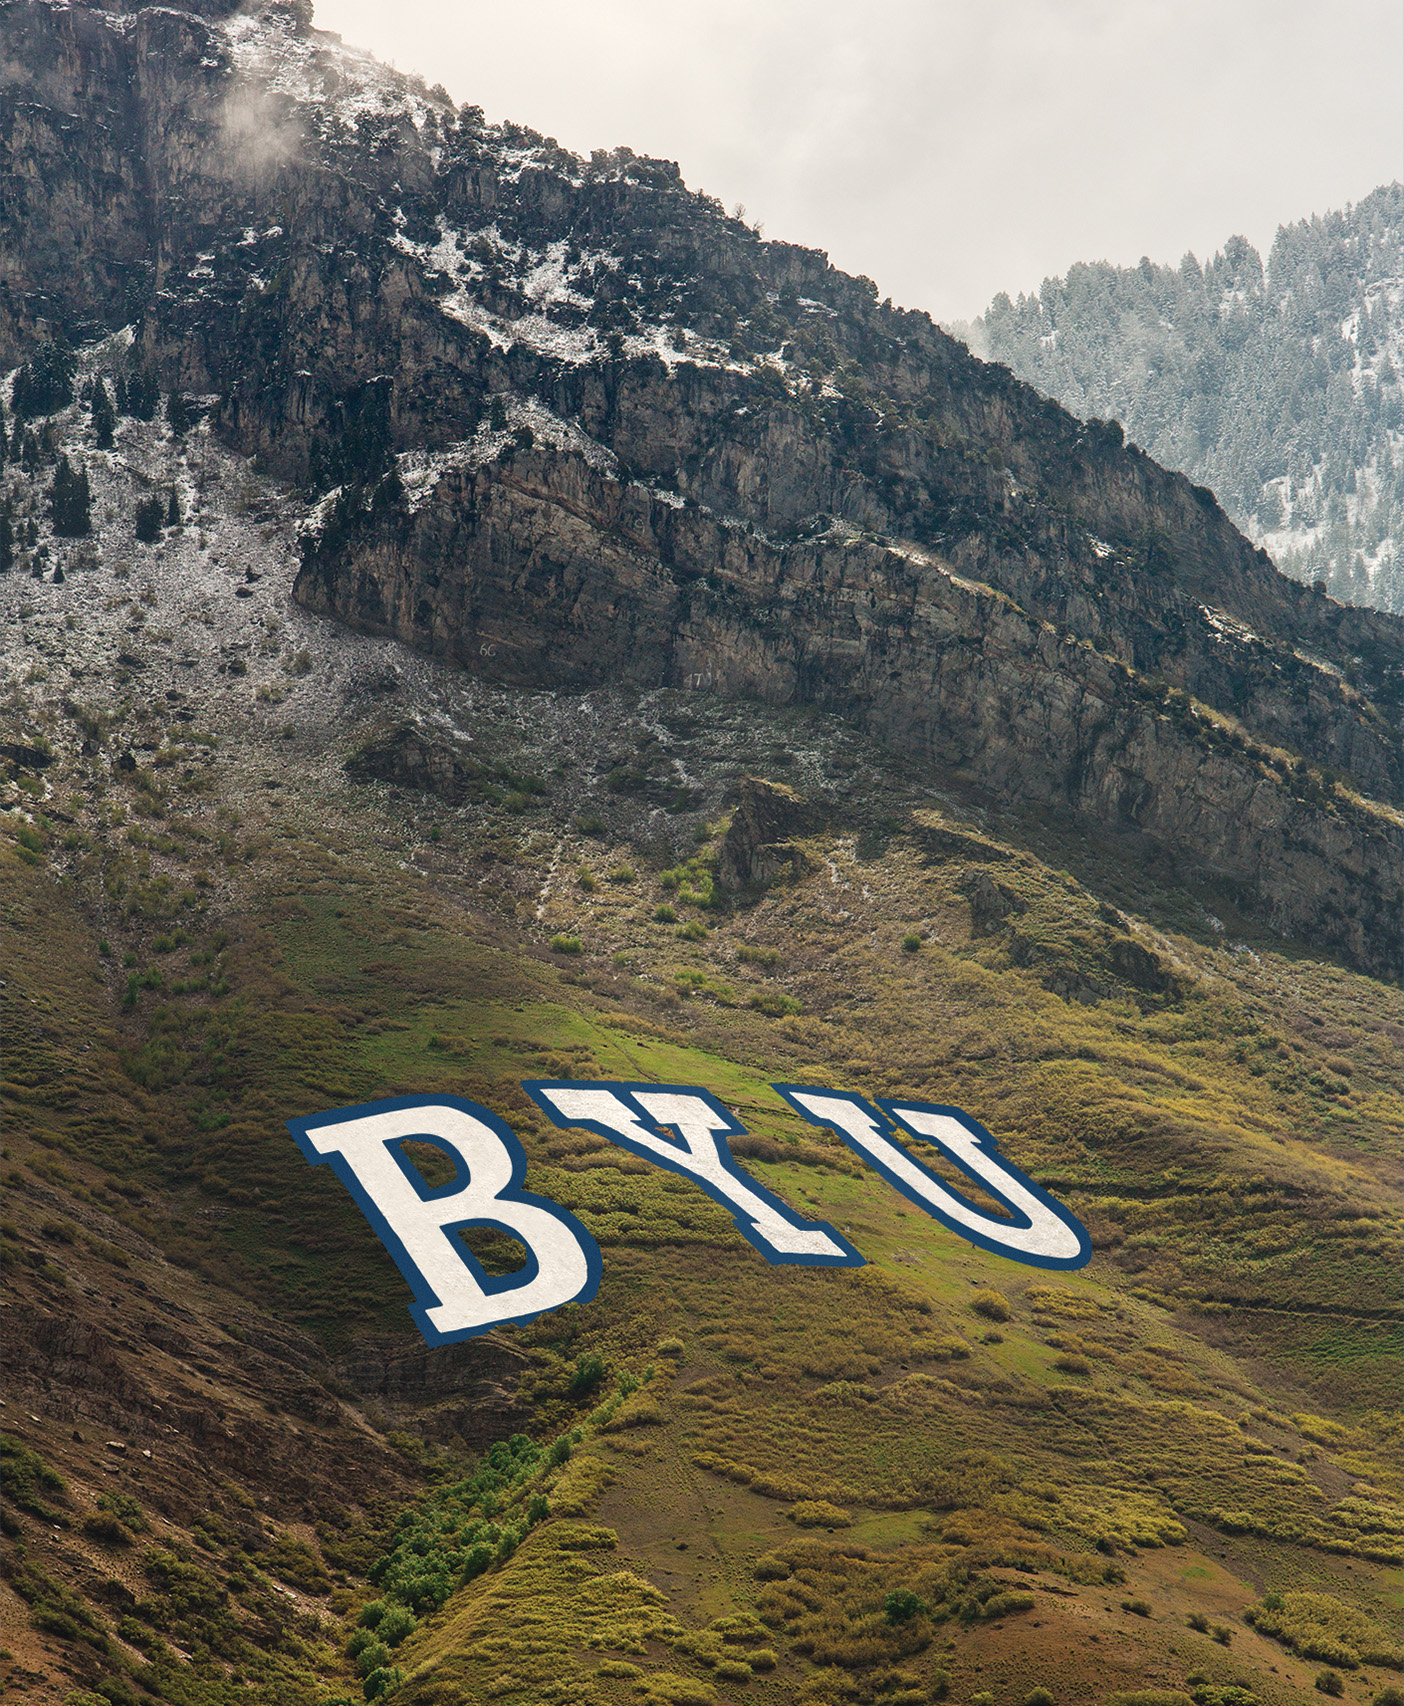 All three letters of BYU appear on the mountain in a photo illustration.